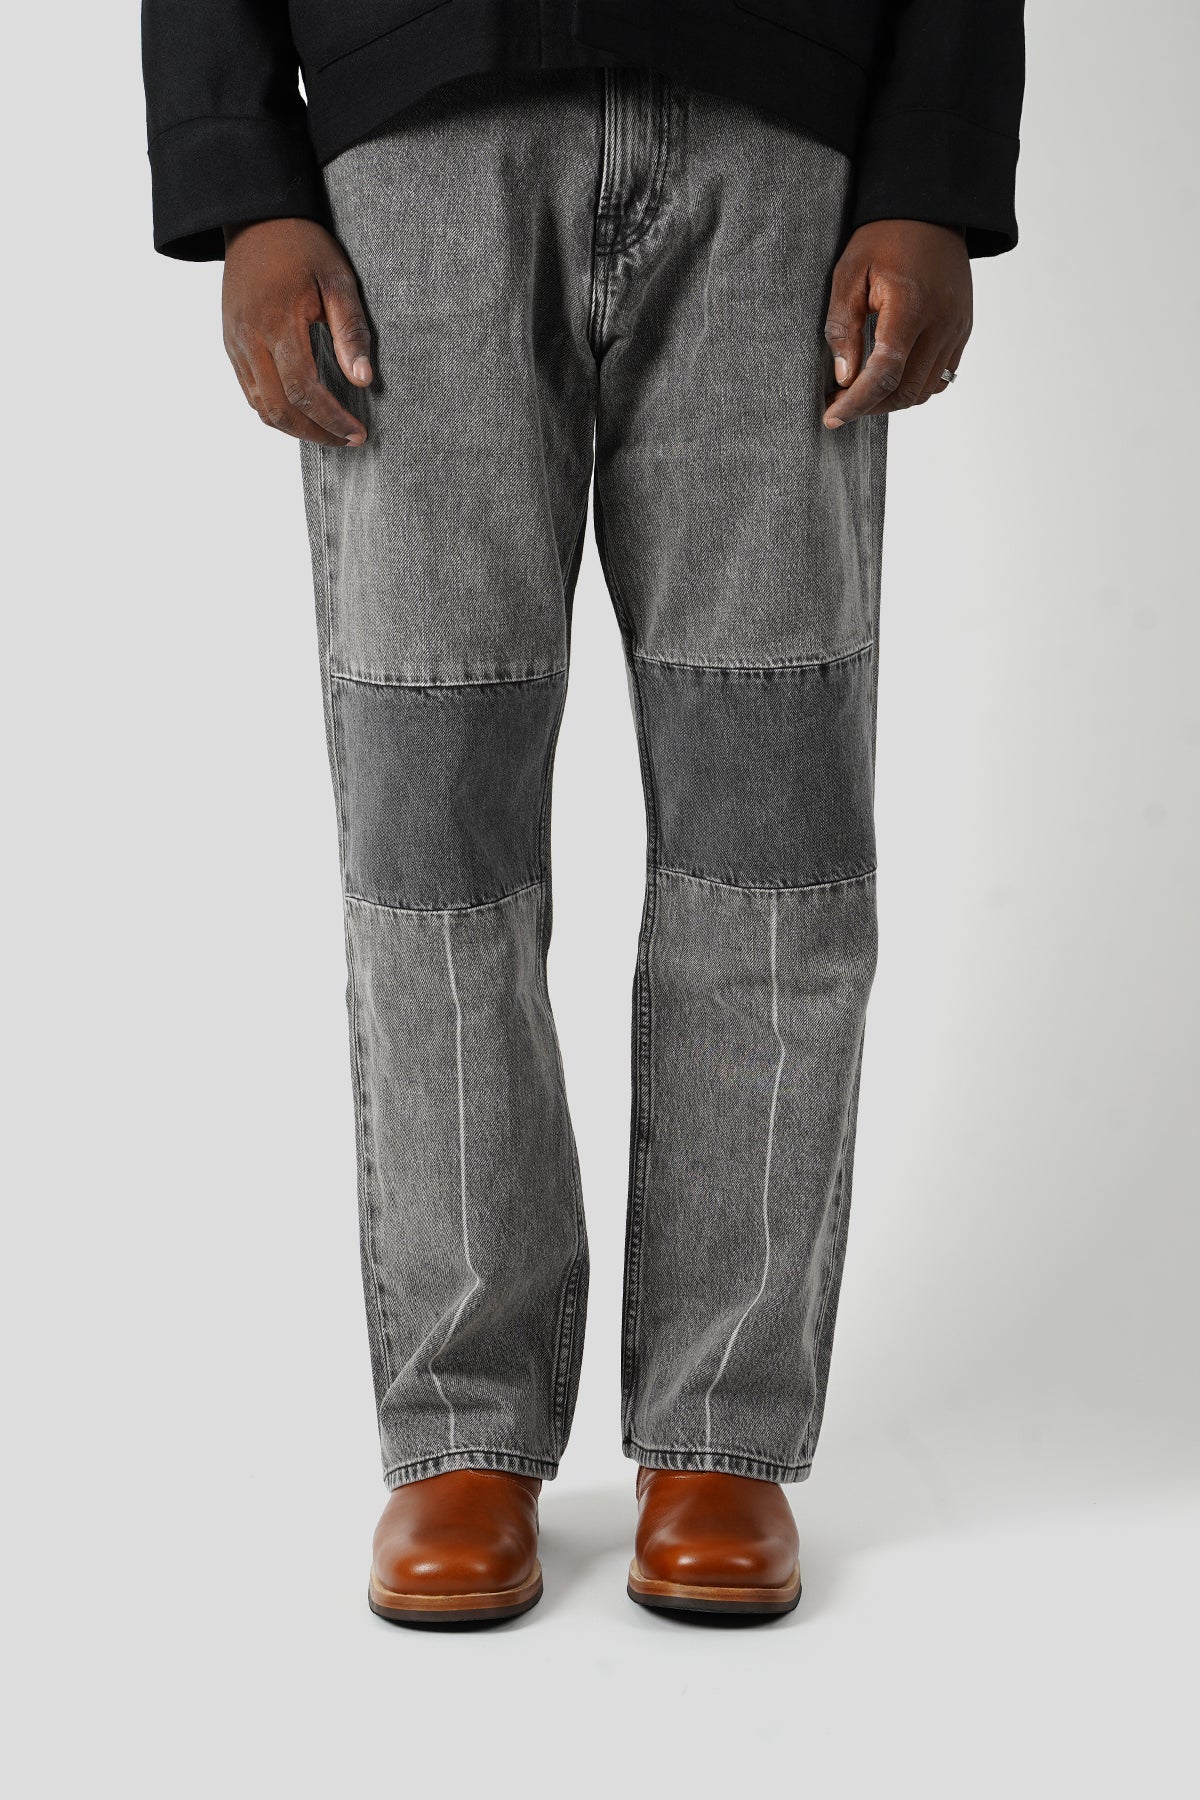 Our Legacy - JEANS EXTENDED THIRD CUT BLACK AND GREY - LE LABO STORE